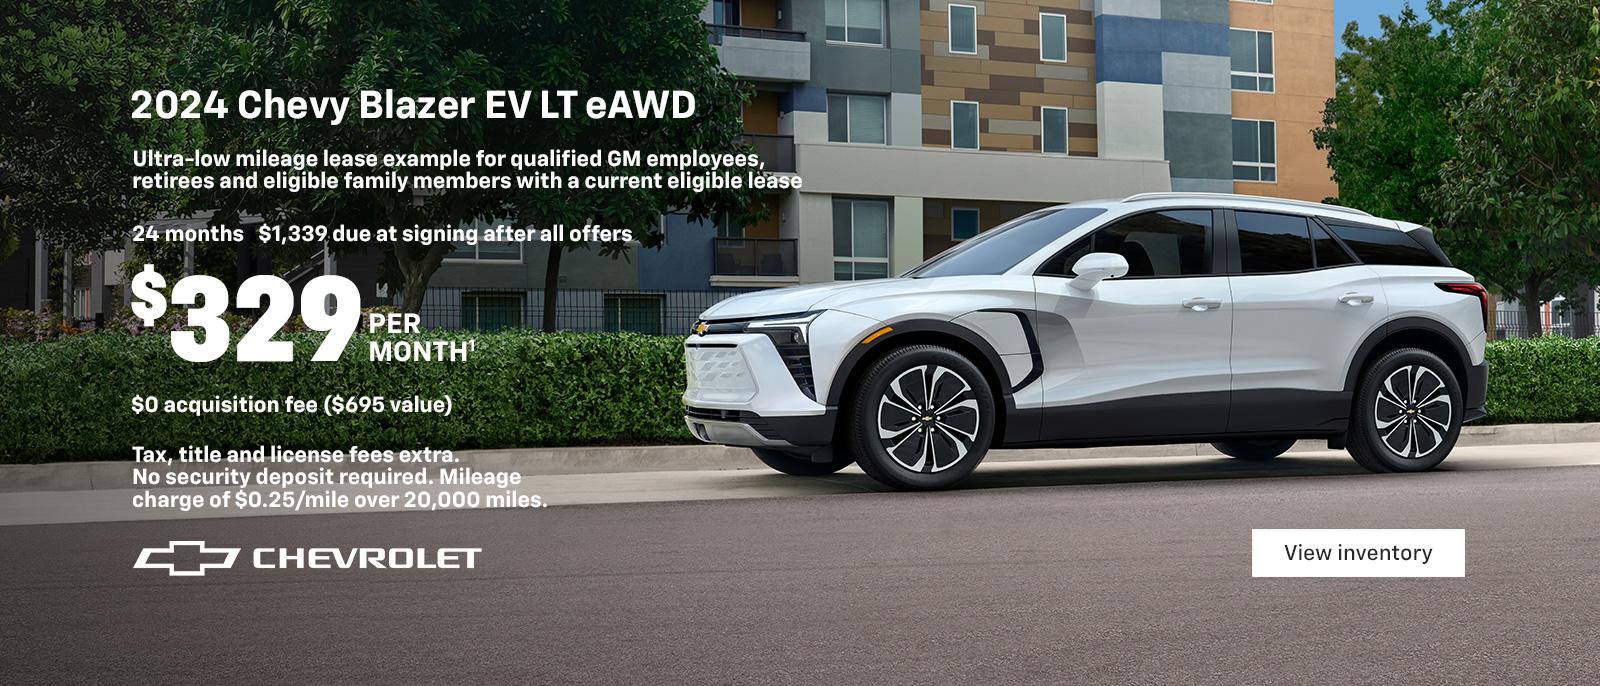 2024 Chevy Blazer EV LT eAWD. 2024 MotorTend SUV of the Year. The first-ever, all-electric Blazer EV. Ultra-low mileage lease example for qualified GM employees, retirees and eligible family members with a current eligible lease. $329 per month. 24 months. $1,339 due at signing after all offers. $0 Acquisition fees ($695 value). Tax, title and license fees extra. No security deposit required. Mileage charge of $0.25/mile over 20,000 miles.